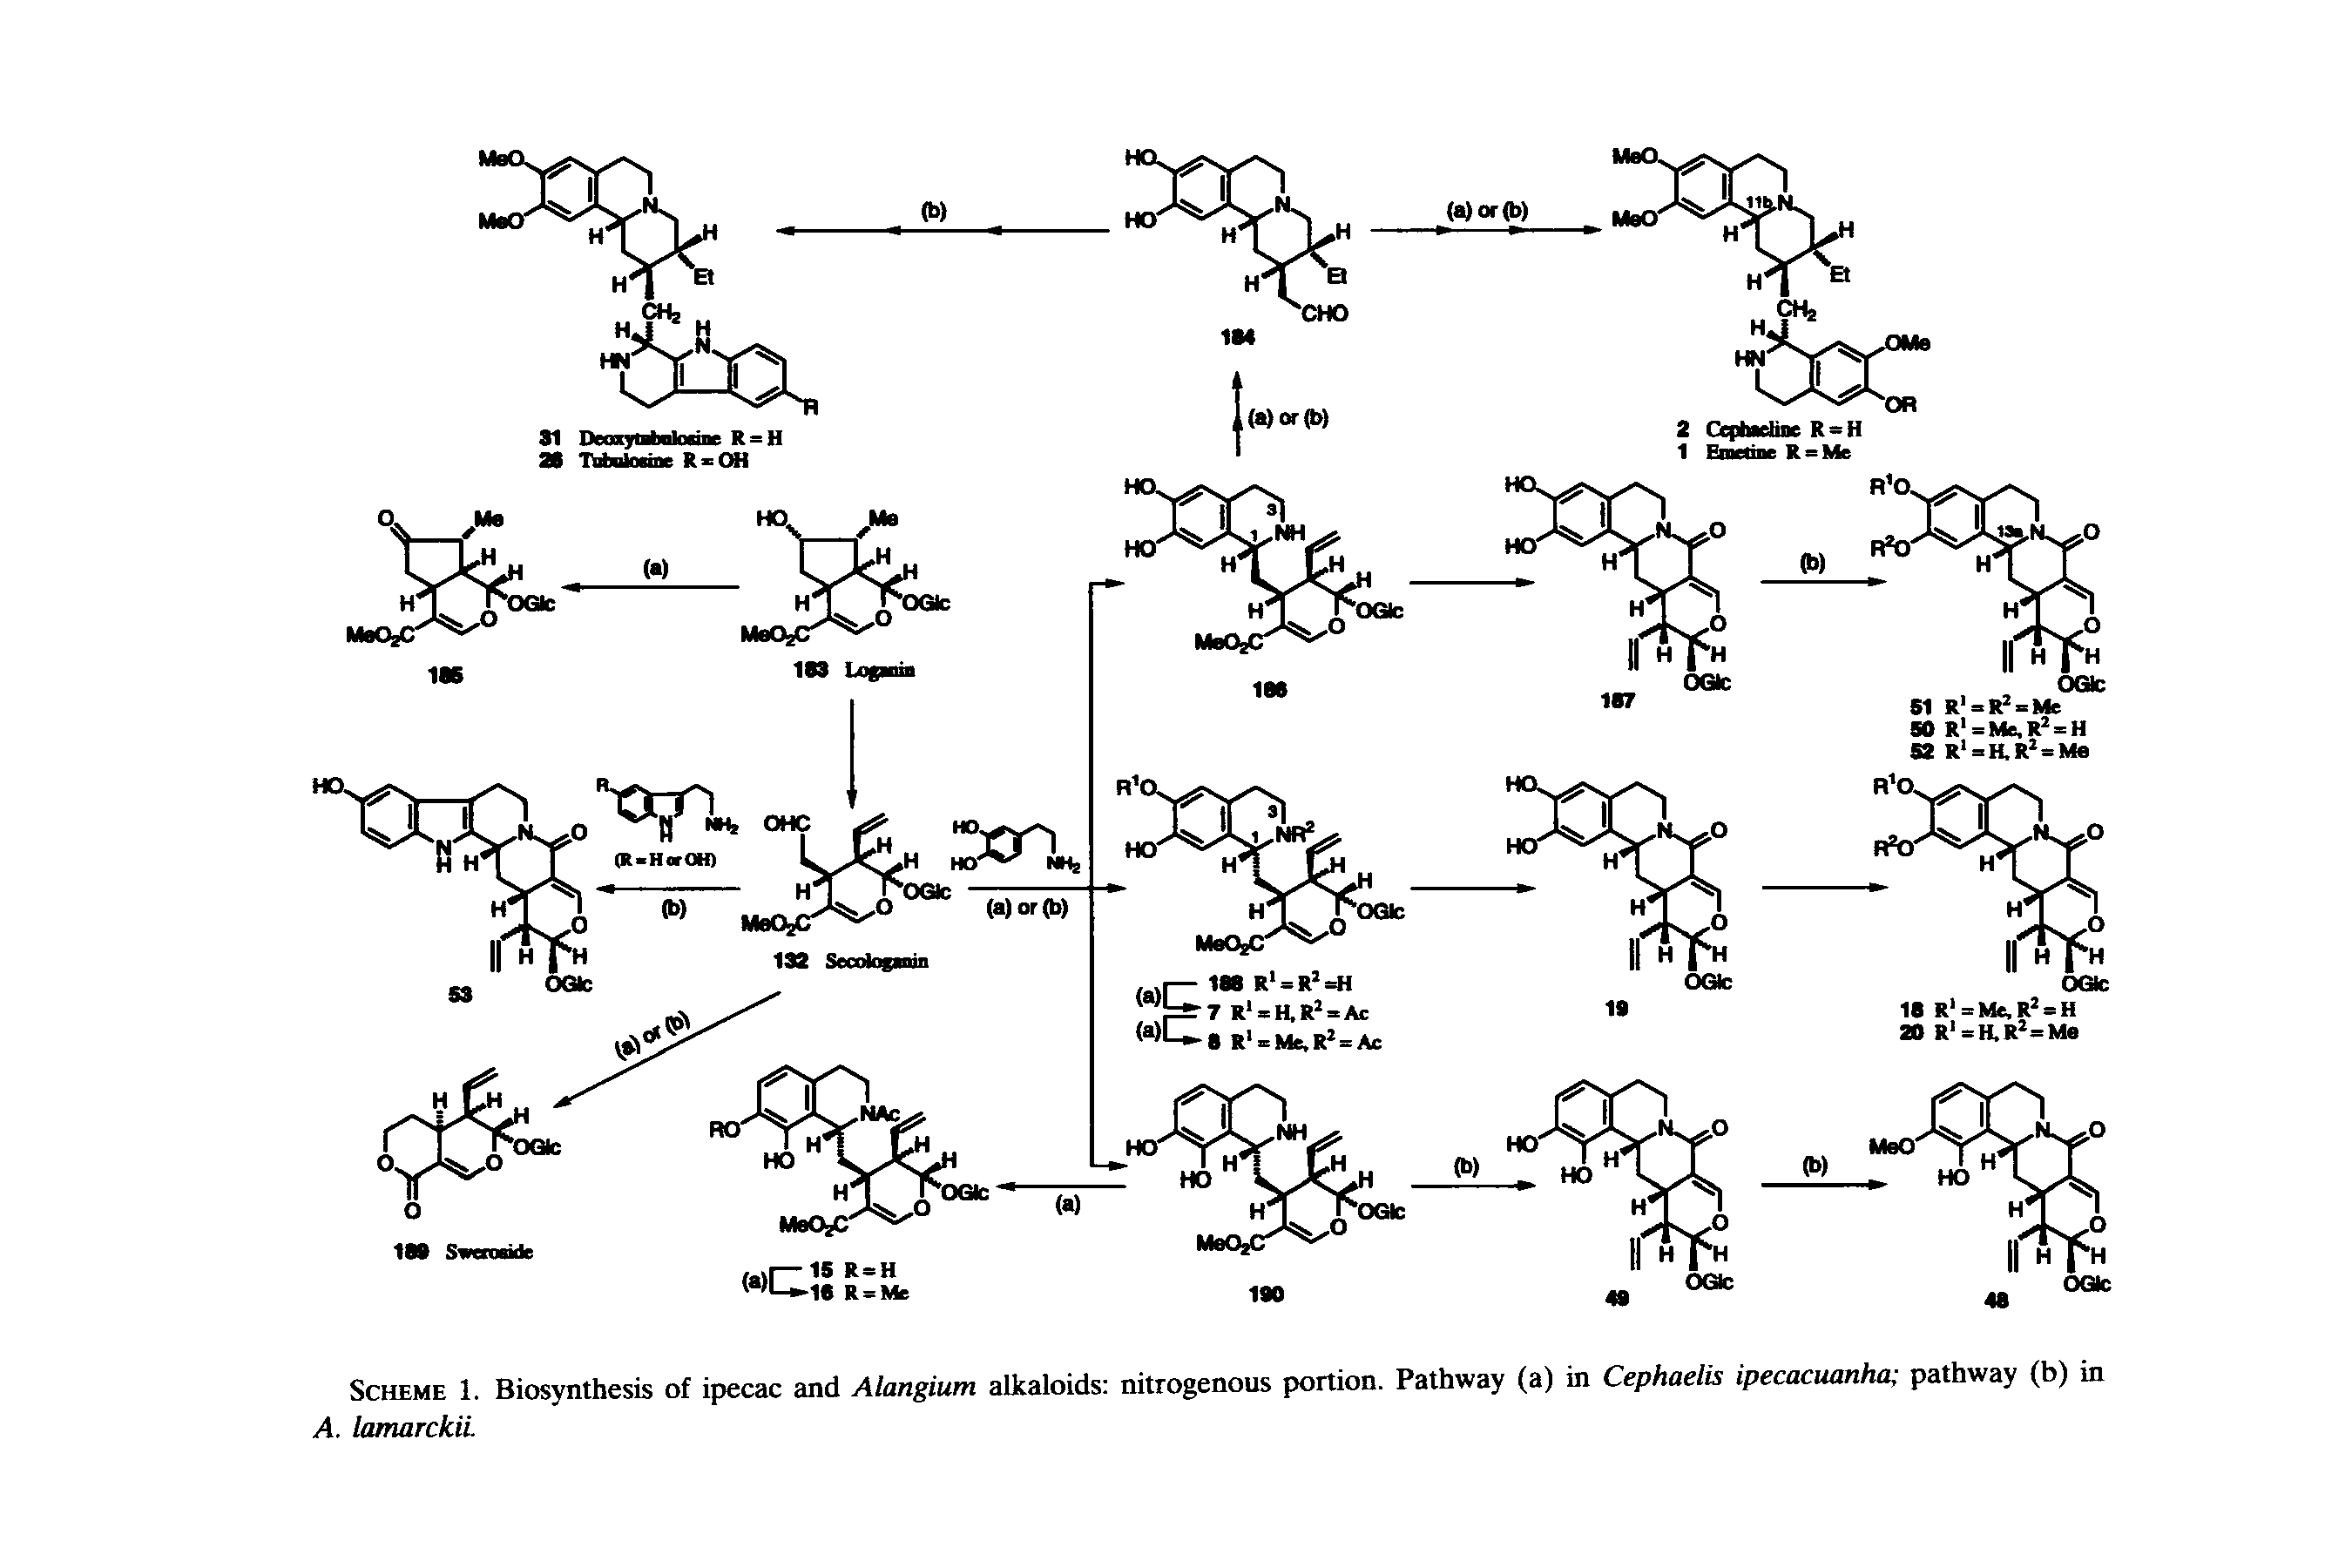 Scheme 1. Biosynthesis of ipecac and Alangium alkaloids nitrogenous portion. Pathway (a) in Cephaelis ipecacuanha pathway (b) in A. lamarckii.